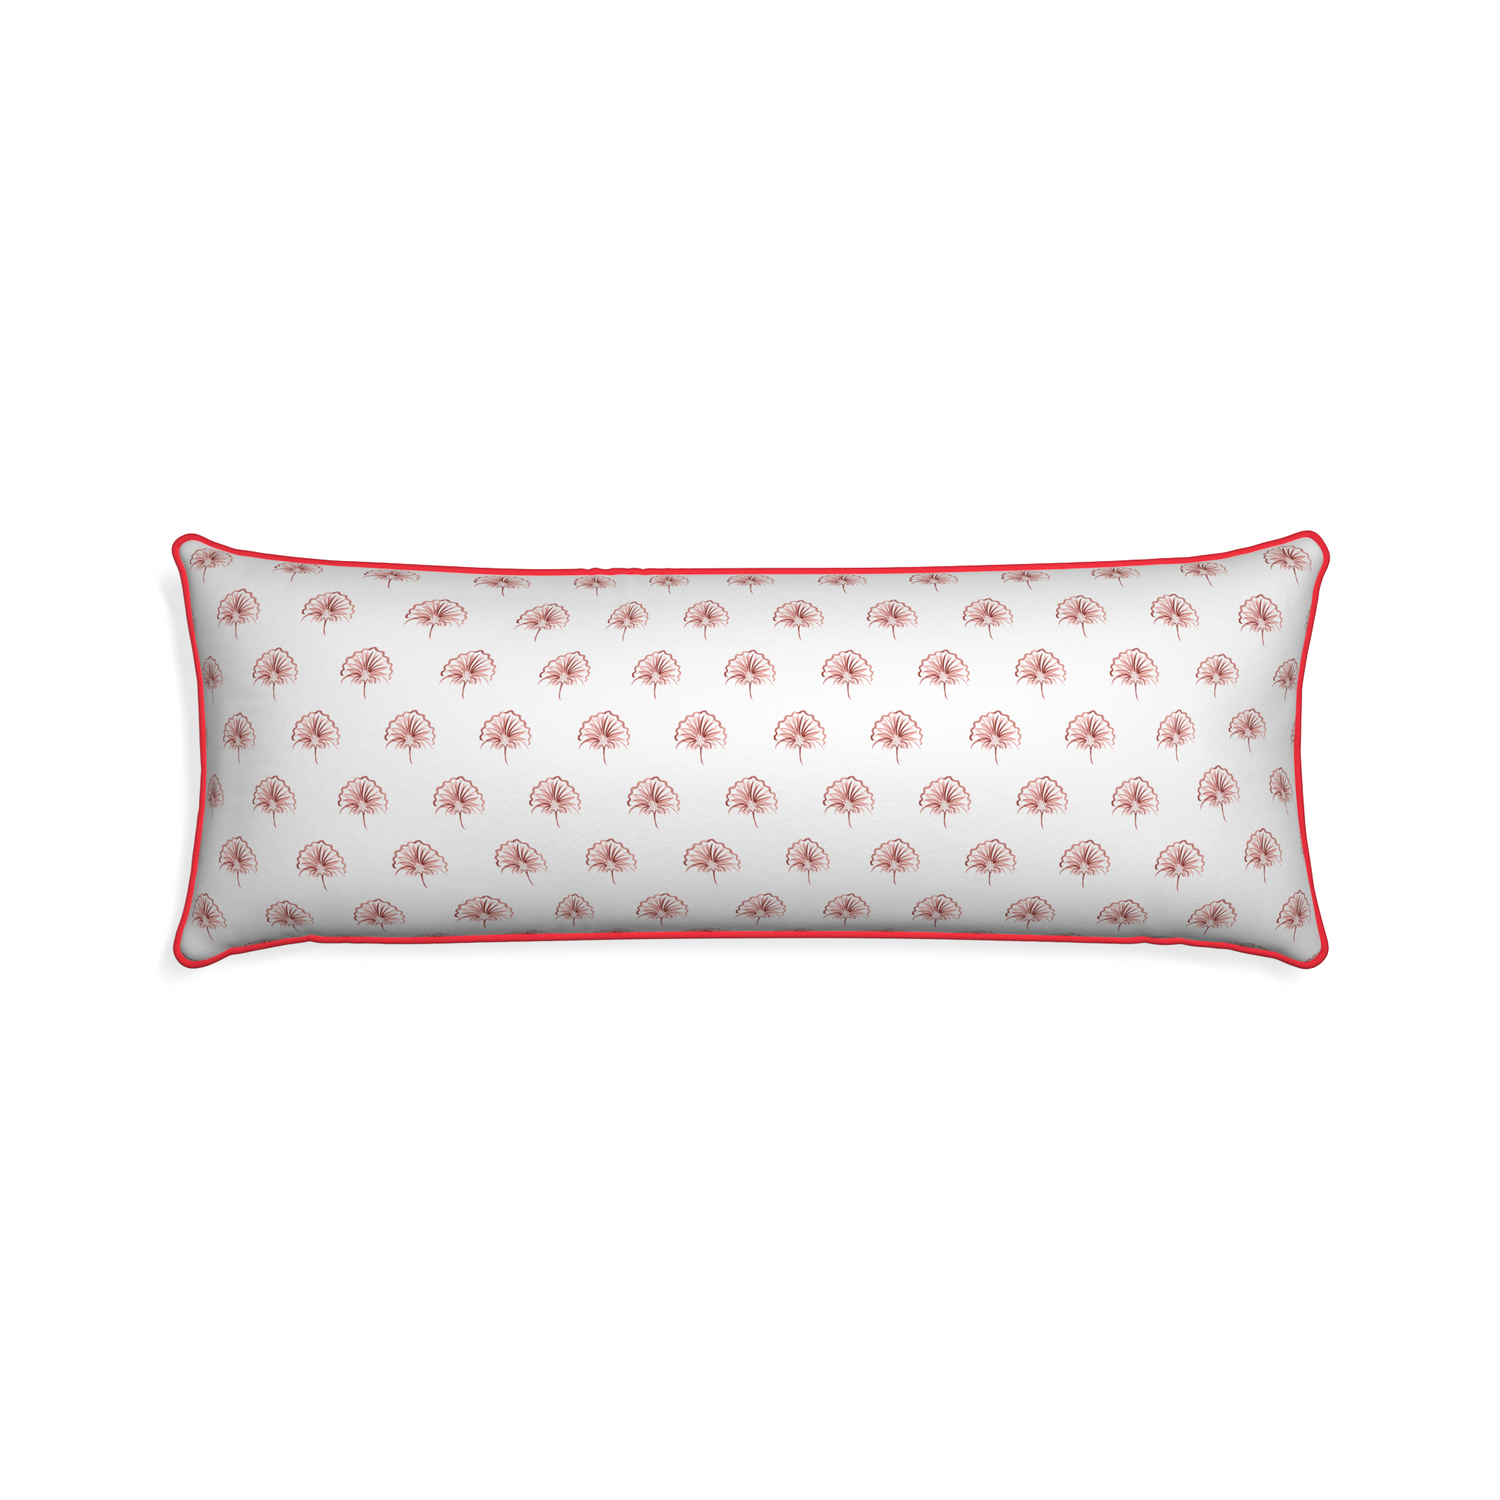 Xl-lumbar penelope rose custom floral pinkpillow with cherry piping on white background